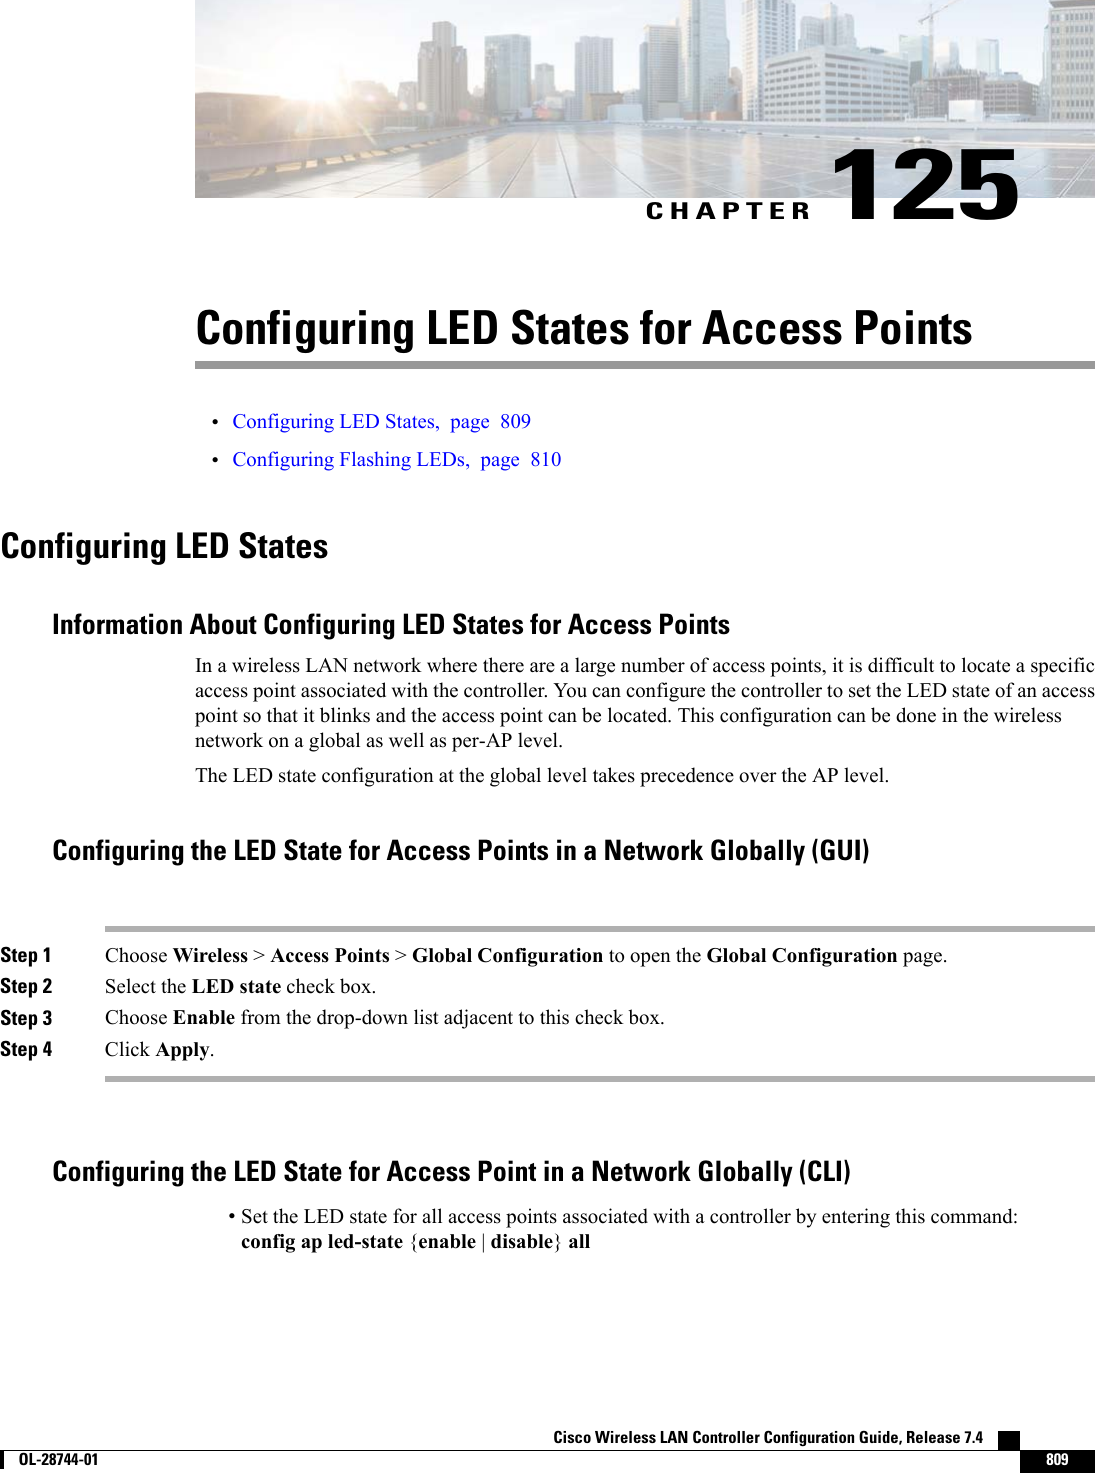 CHAPTER 125Configuring LED States for Access Points•Configuring LED States, page 809•Configuring Flashing LEDs, page 810Configuring LED StatesInformation About Configuring LED States for Access PointsIn a wireless LAN network where there are a large number of access points, it is difficult to locate a specificaccess point associated with the controller. You can configure the controller to set the LED state of an accesspoint so that it blinks and the access point can be located. This configuration can be done in the wirelessnetwork on a global as well as per-AP level.The LED state configuration at the global level takes precedence over the AP level.Configuring the LED State for Access Points in a Network Globally (GUI)Step 1 Choose Wireless &gt;Access Points &gt;Global Configuration to open the Global Configuration page.Step 2 Select the LED state check box.Step 3 Choose Enable from the drop-down list adjacent to this check box.Step 4 Click Apply.Configuring the LED State for Access Point in a Network Globally (CLI)•Set the LED state for all access points associated with a controller by entering this command:config ap led-state {enable |disable}allCisco Wireless LAN Controller Configuration Guide, Release 7.4        OL-28744-01 809